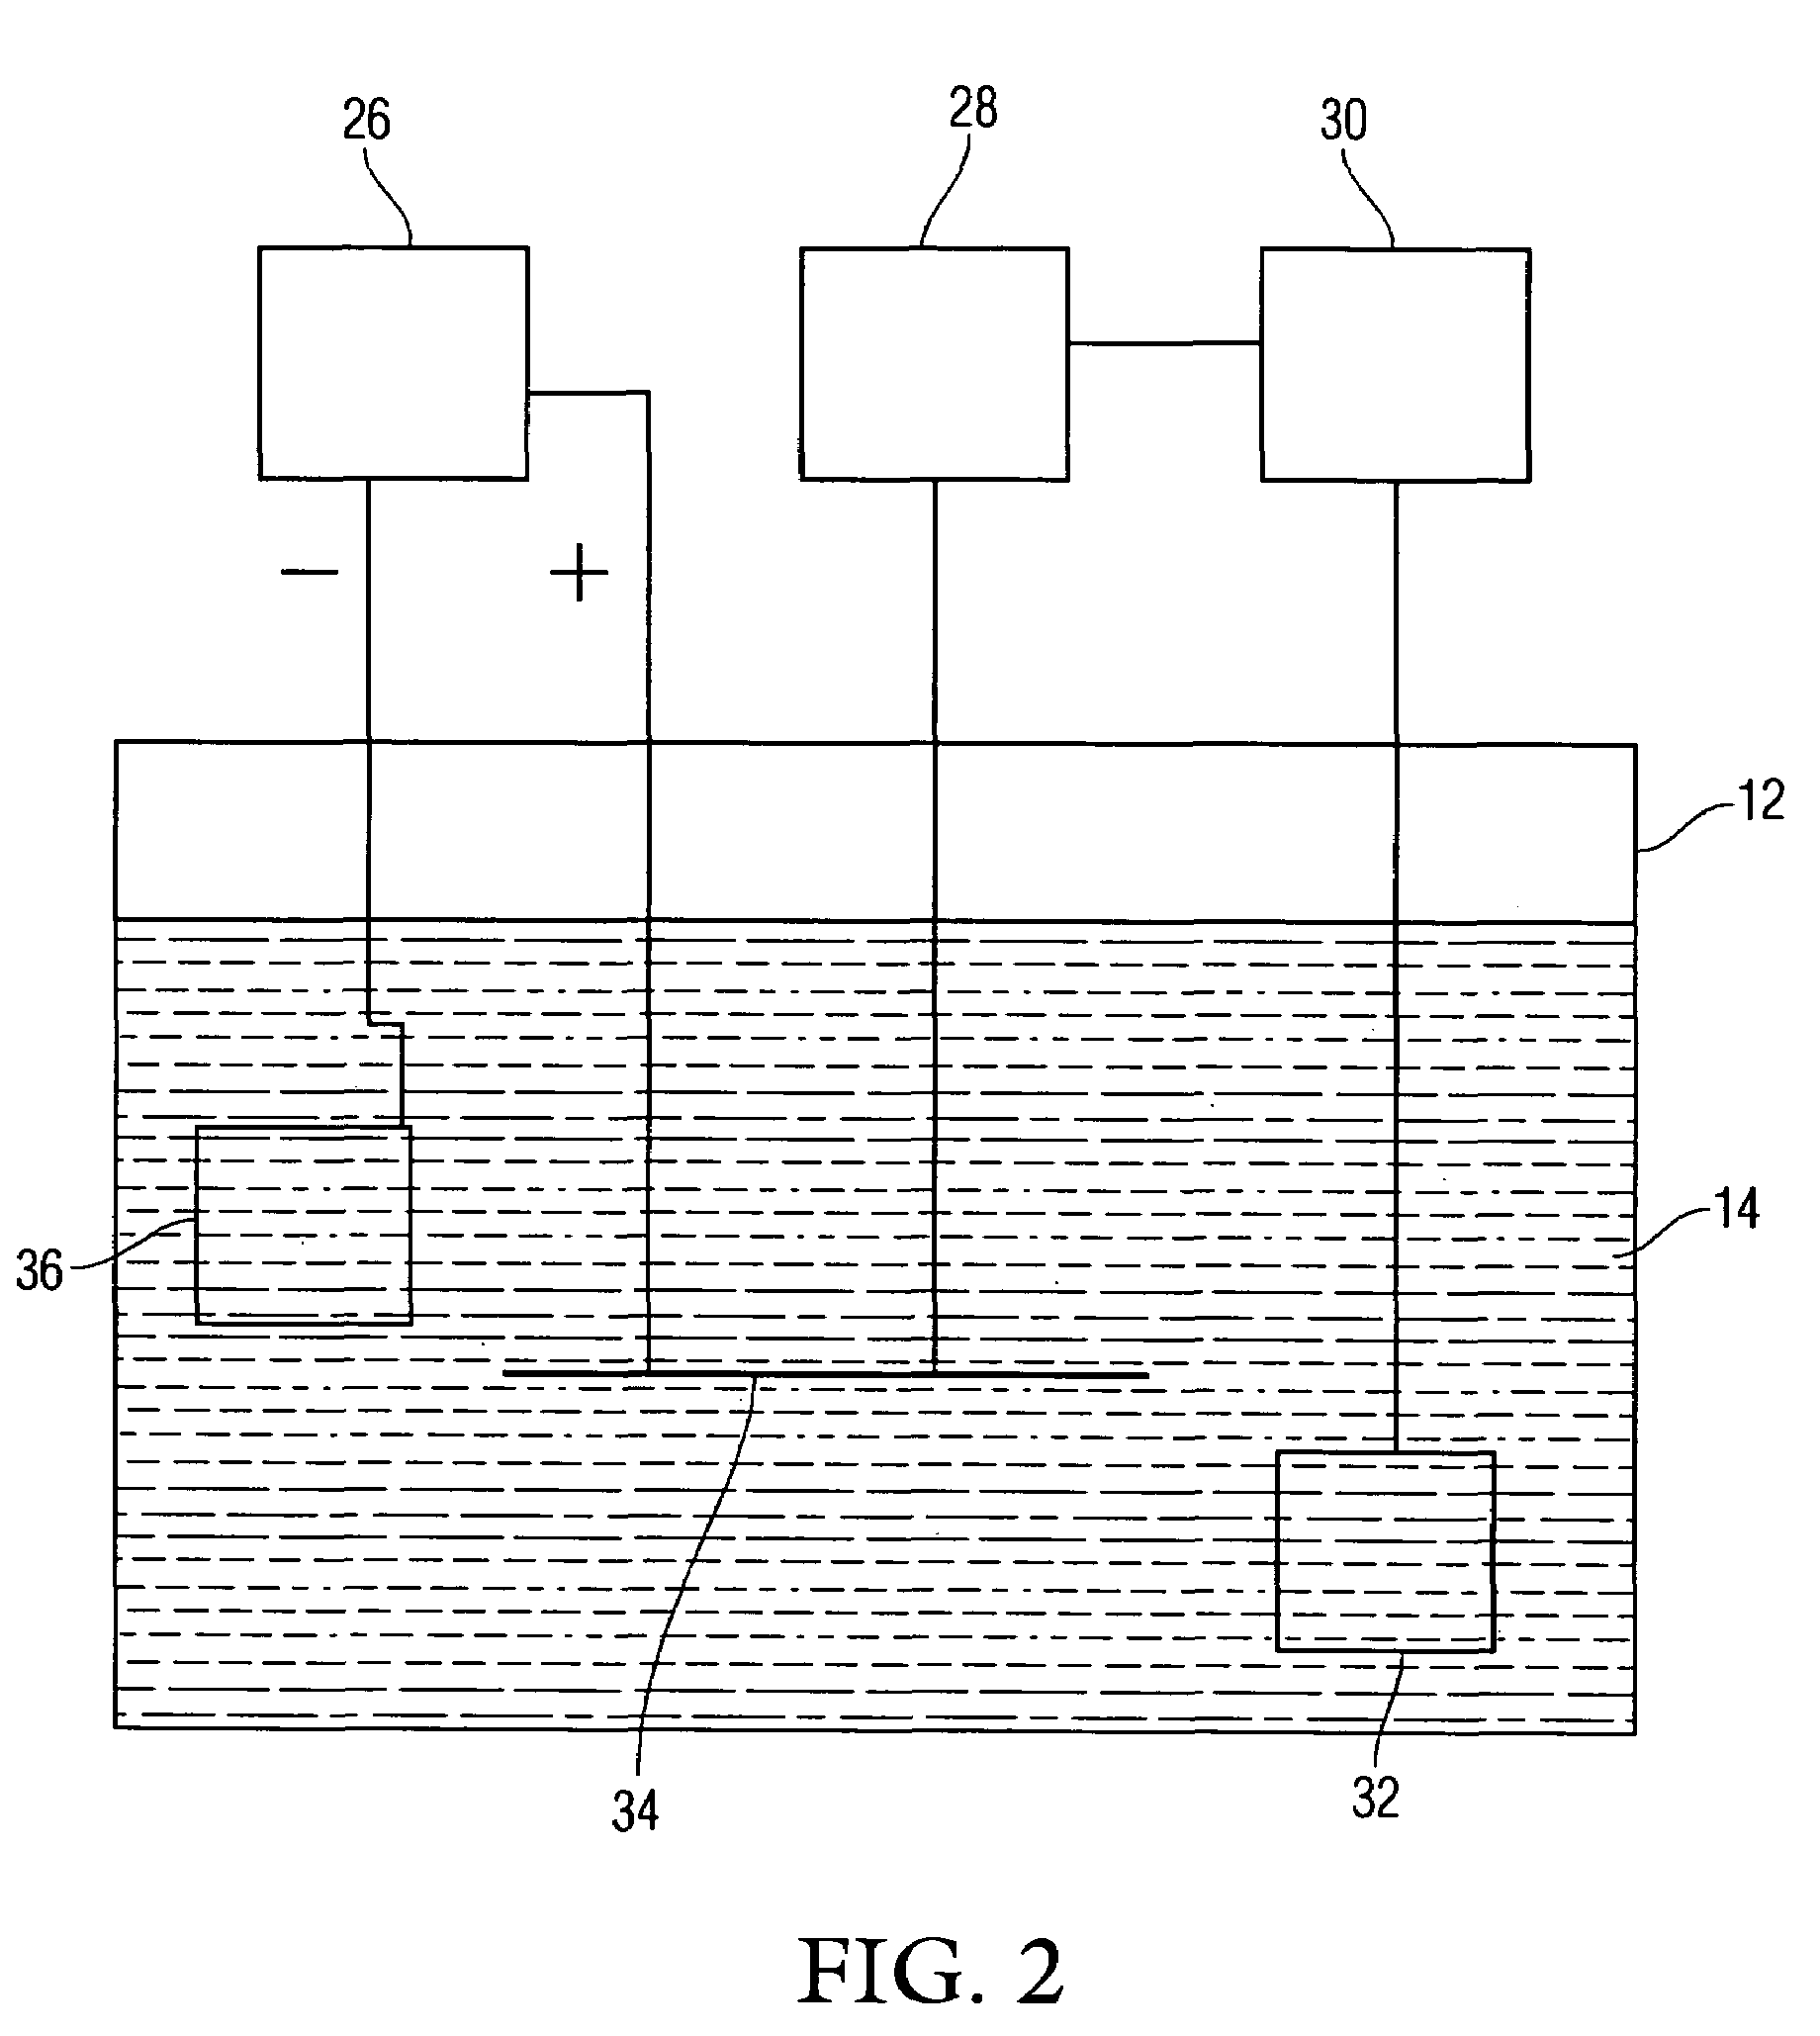 Method and test chamber for accelerated aging of materials and bonds subject to corrosion related degradation